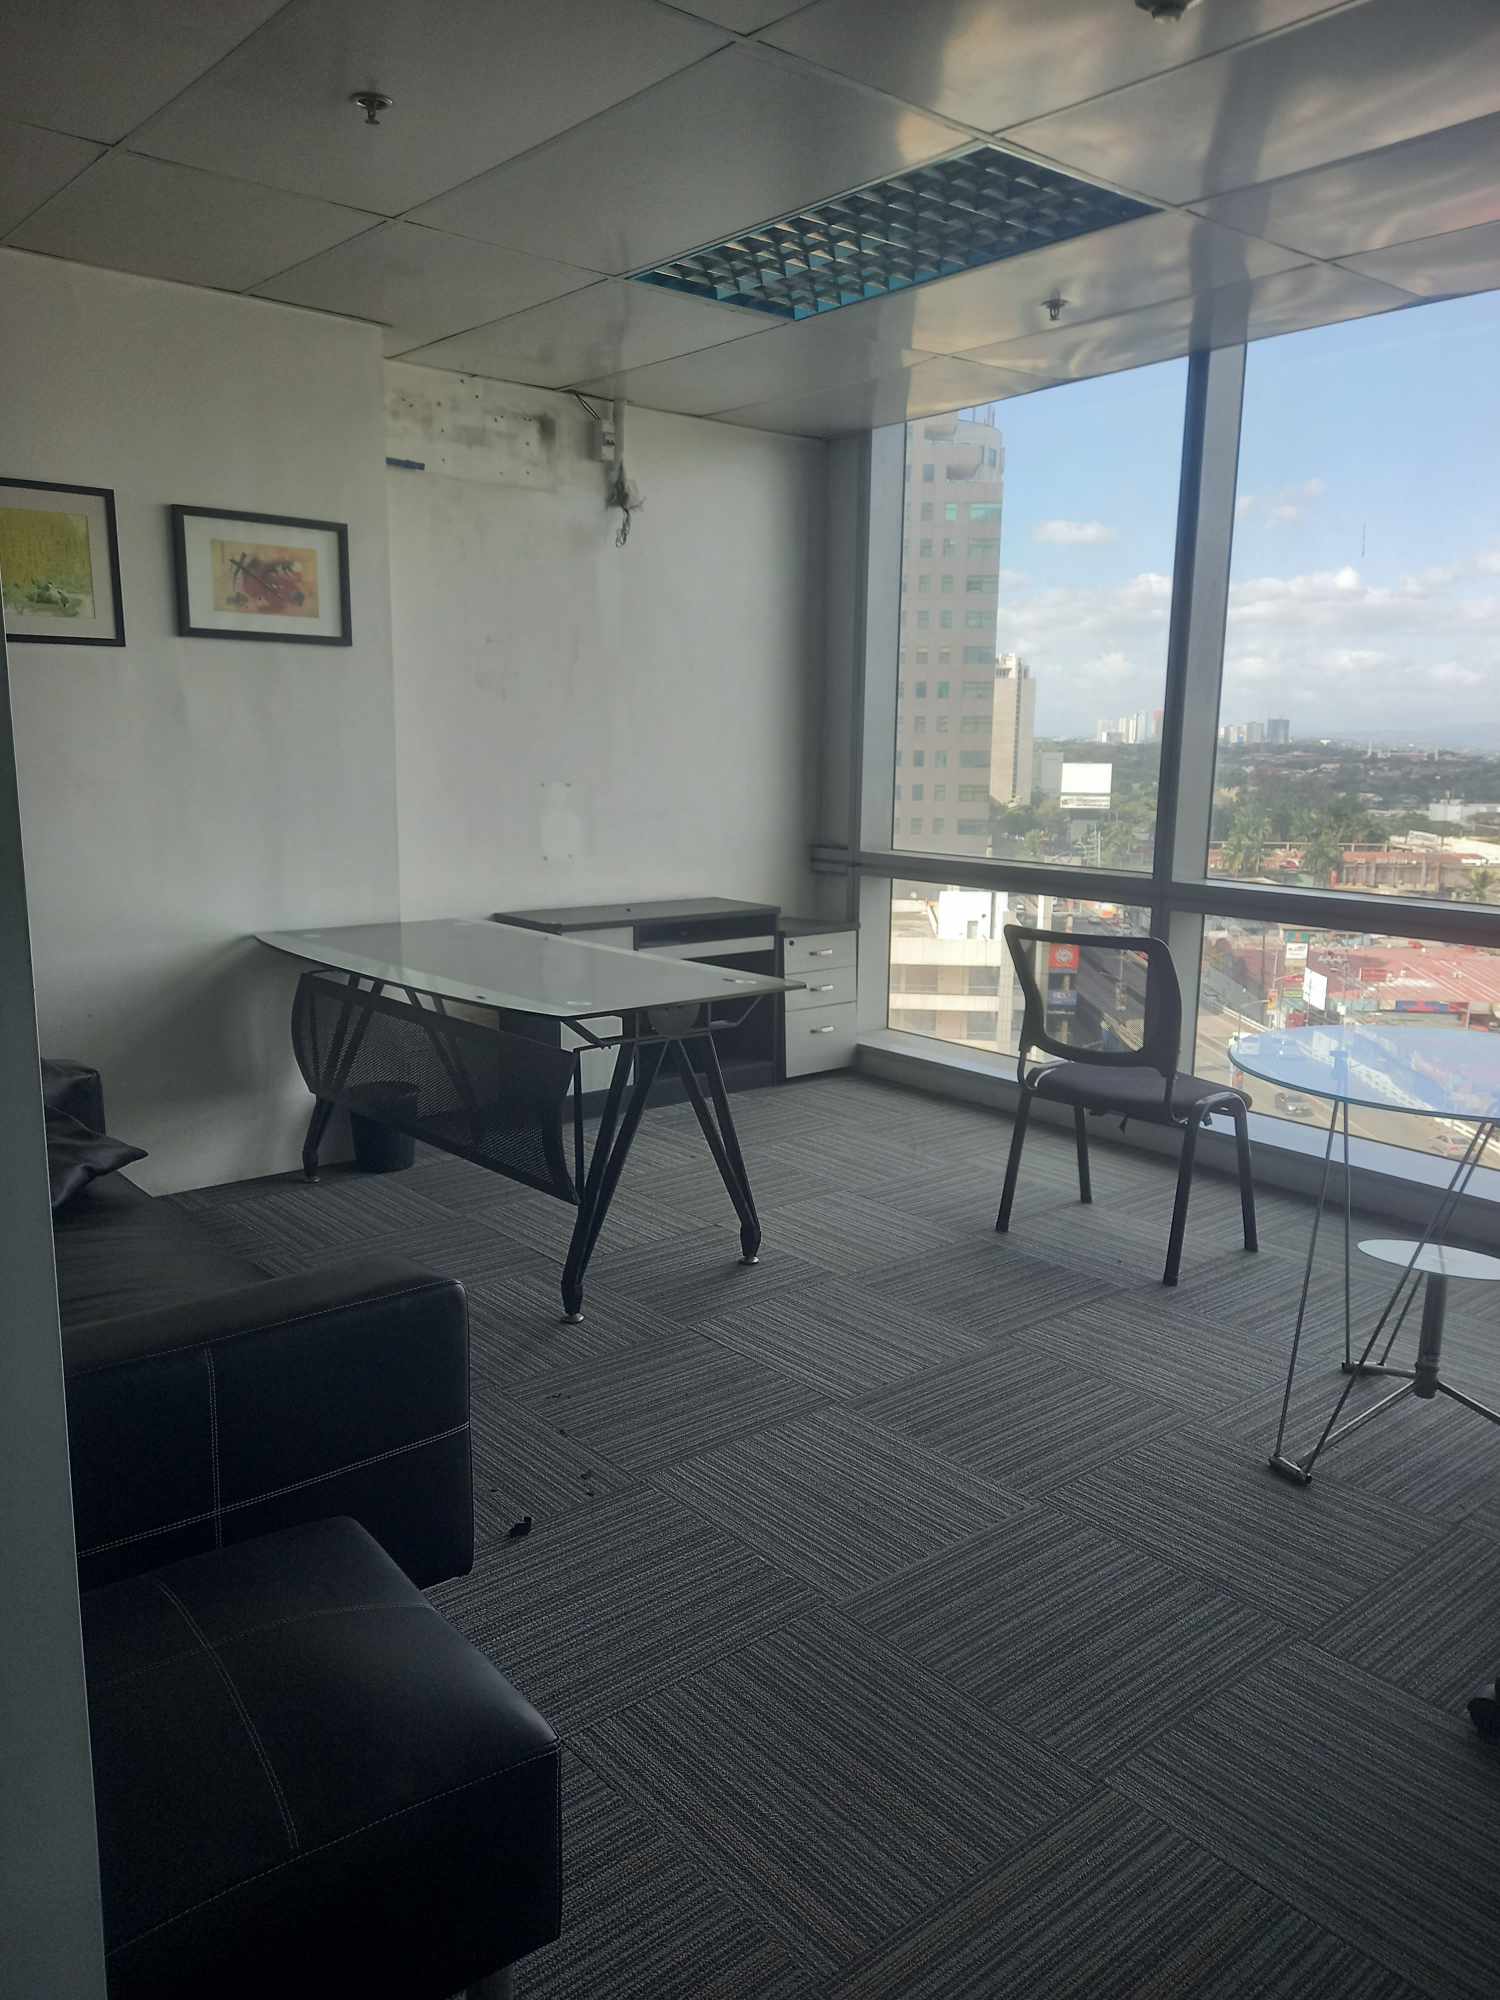 For Rent Lease Semi Furnished Office Space Ortigas Center 156sqm